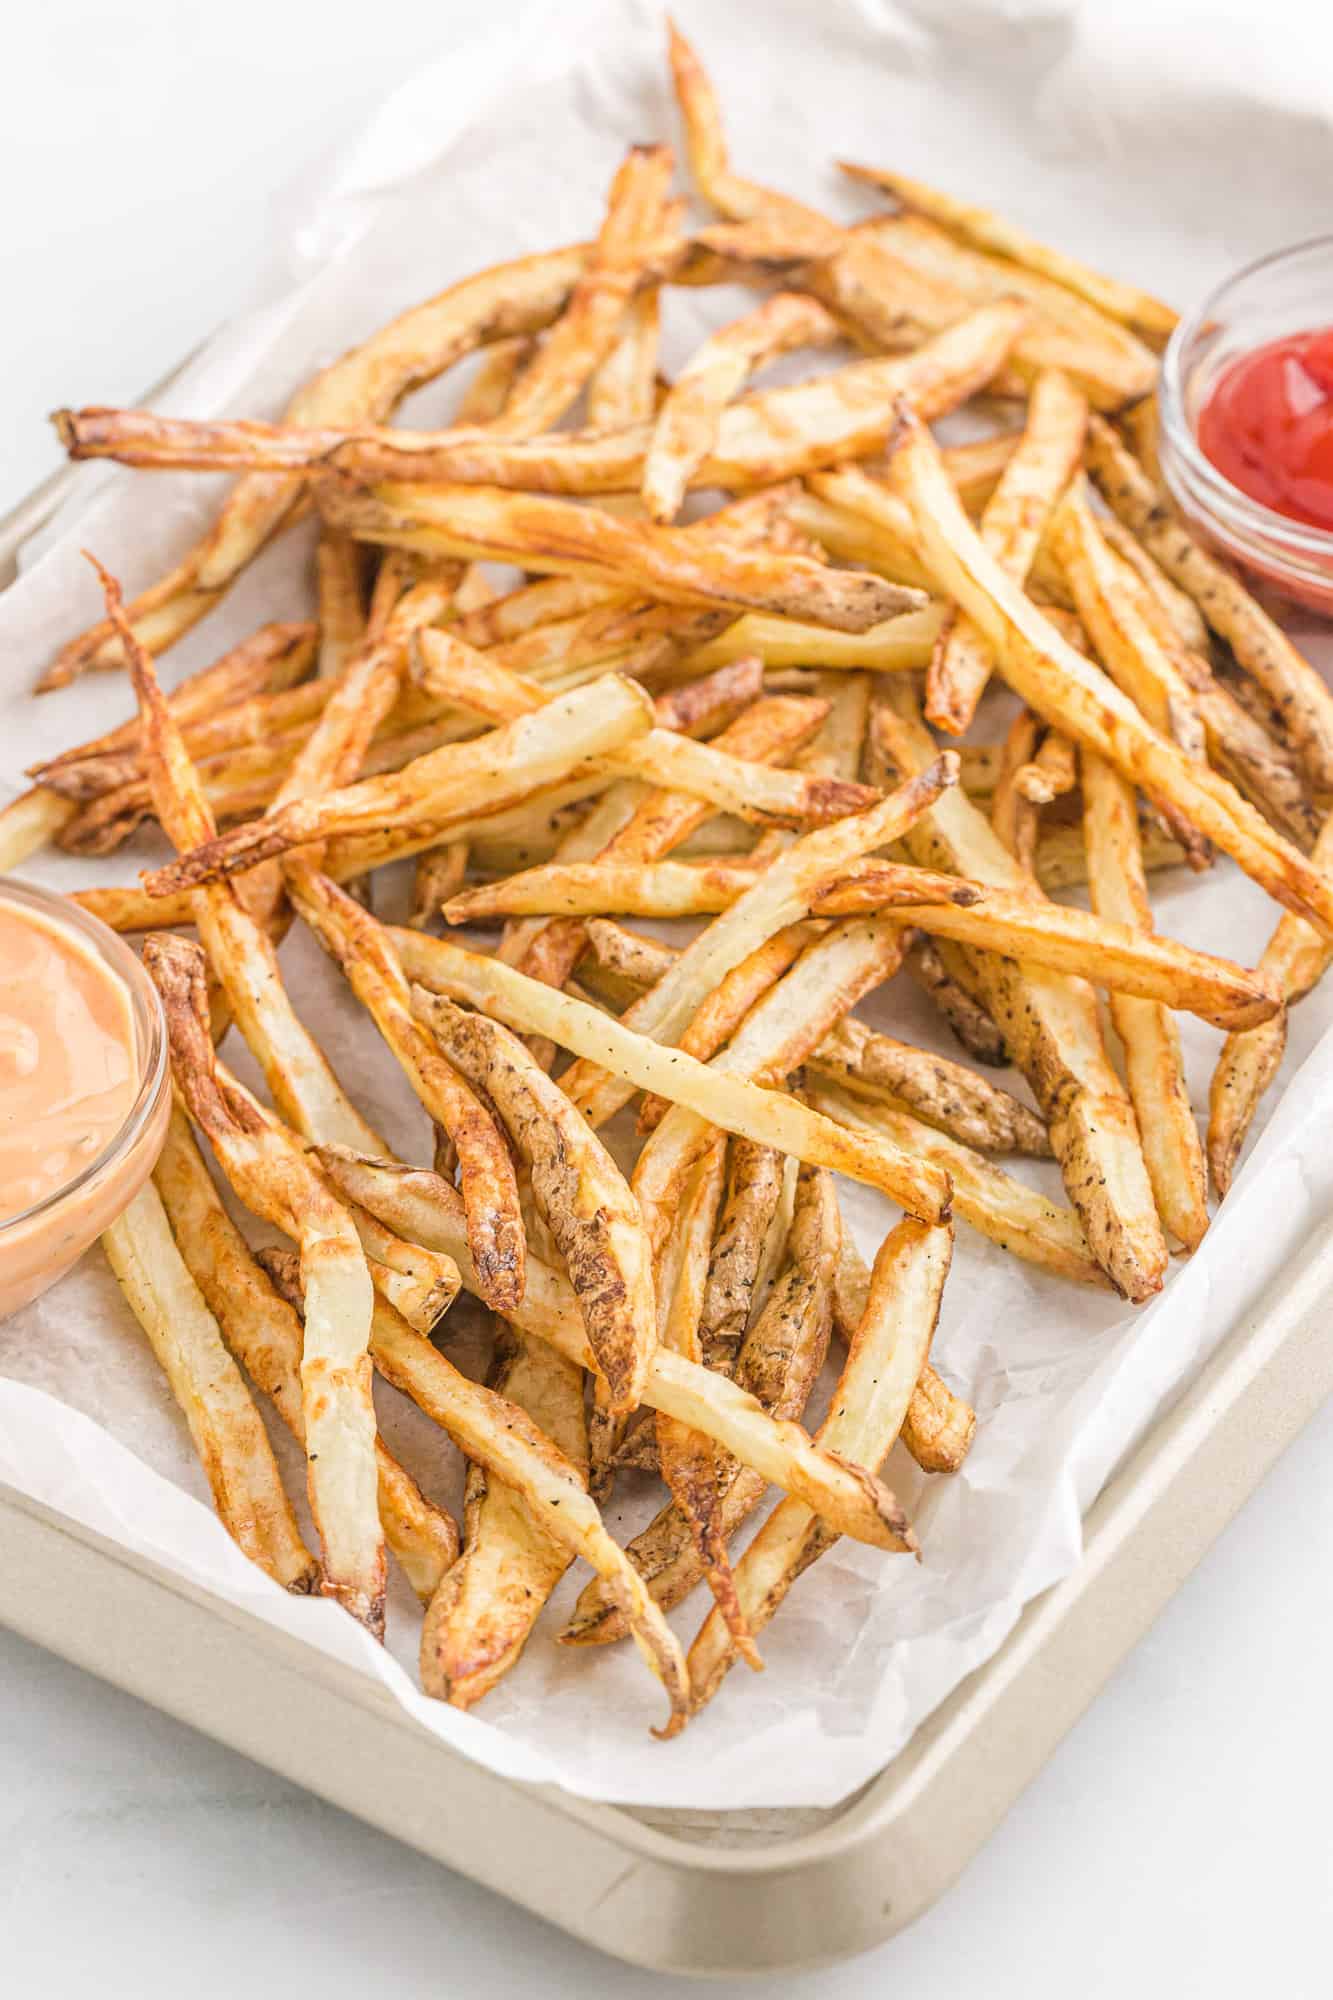 Fries on a lined baking sheet.